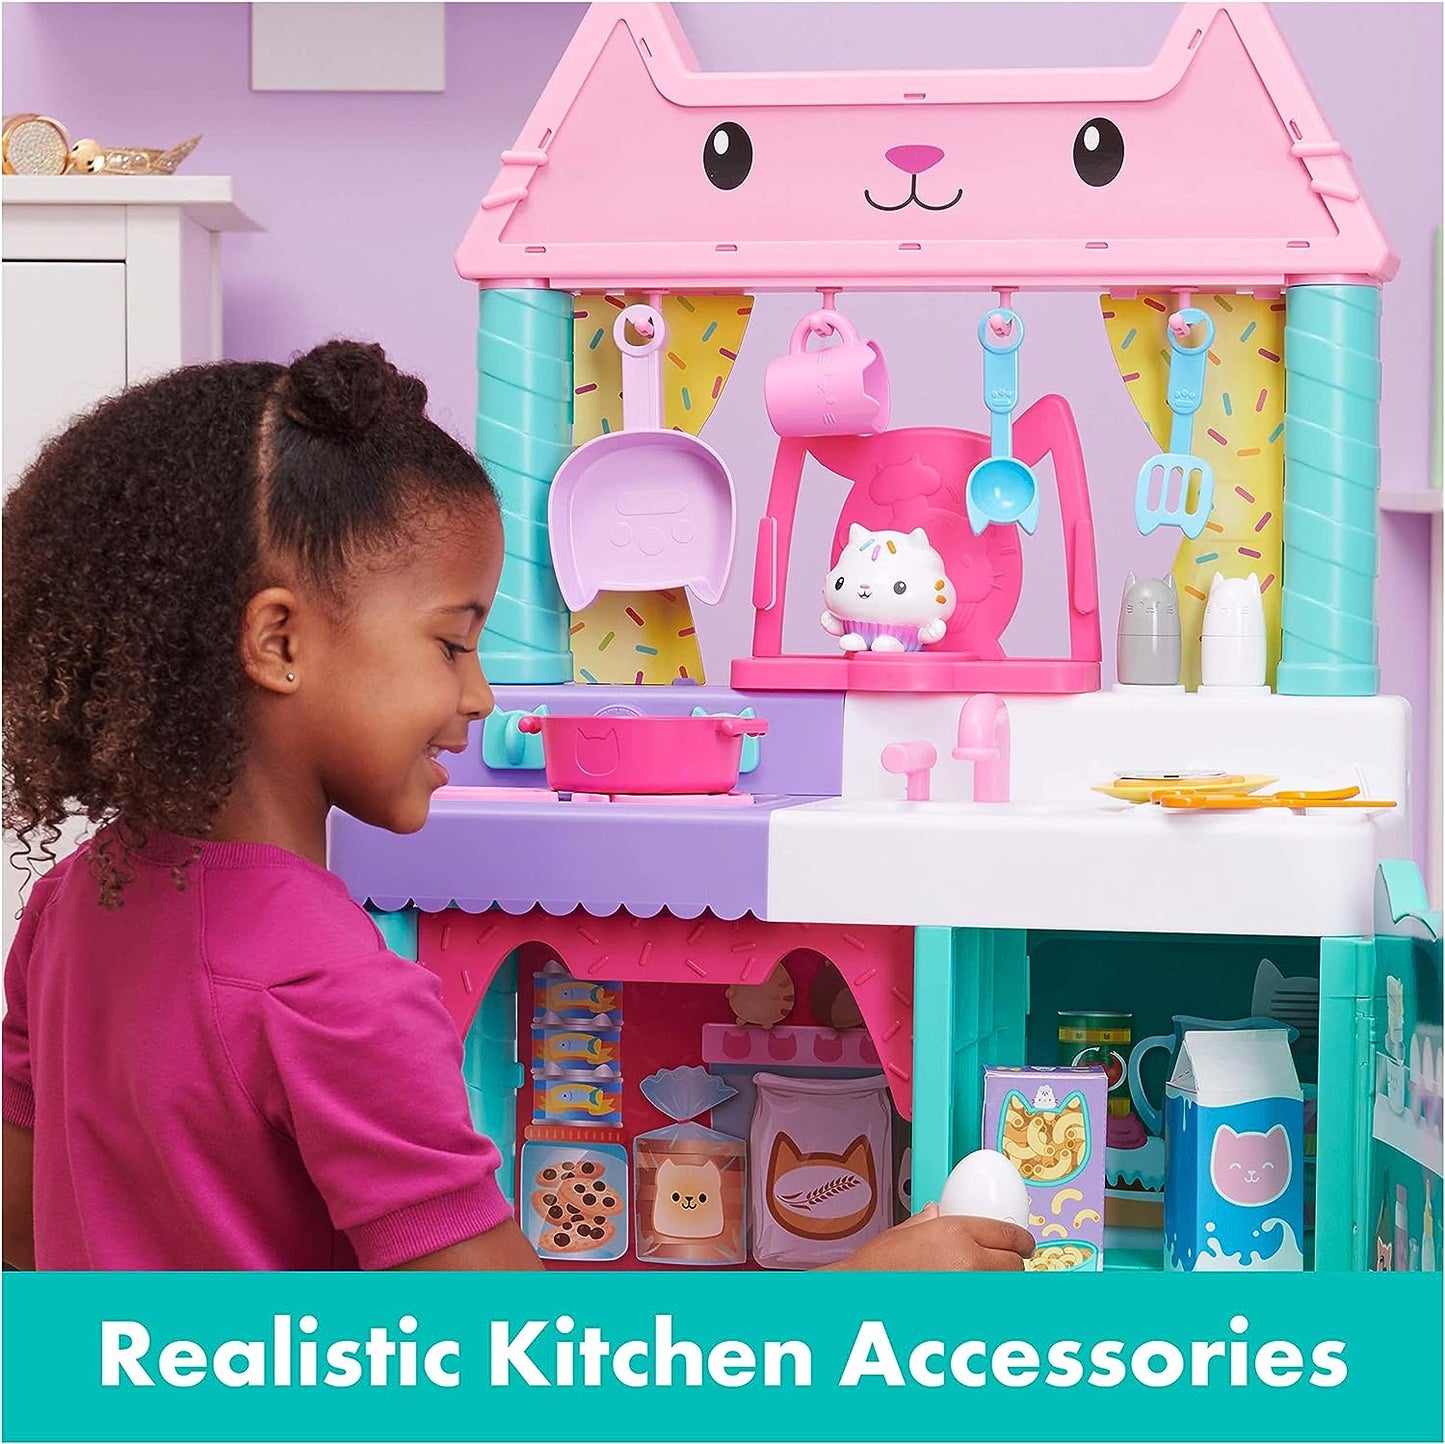 Gabby’s Dollhouse, Cakey Kitchen Set for Kids with Play Kitchen Accessories, Play Food, Sounds, Music and Kids Toys for Girls and Boys Ages 3 and Up